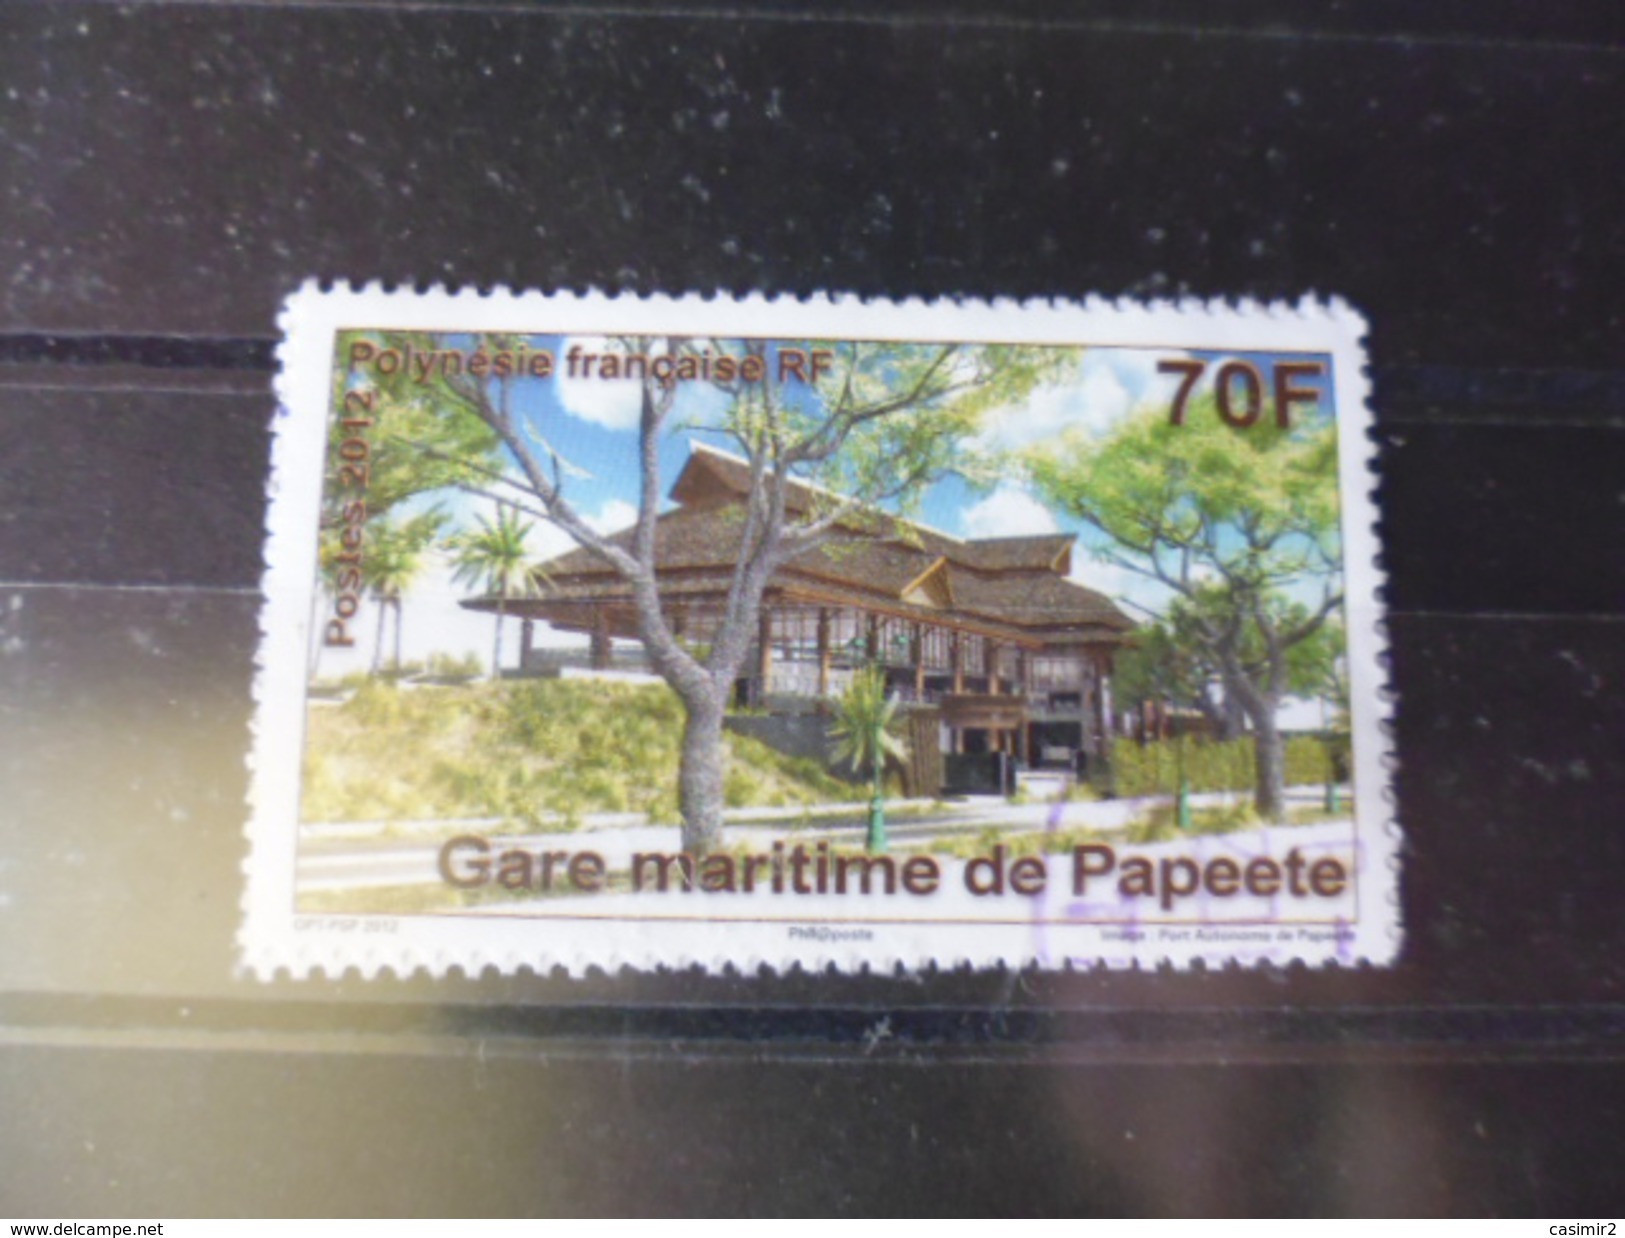 POLYNESIE FRANCAISE TIMBRE OBLITERE YVERT N°979 - Used Stamps